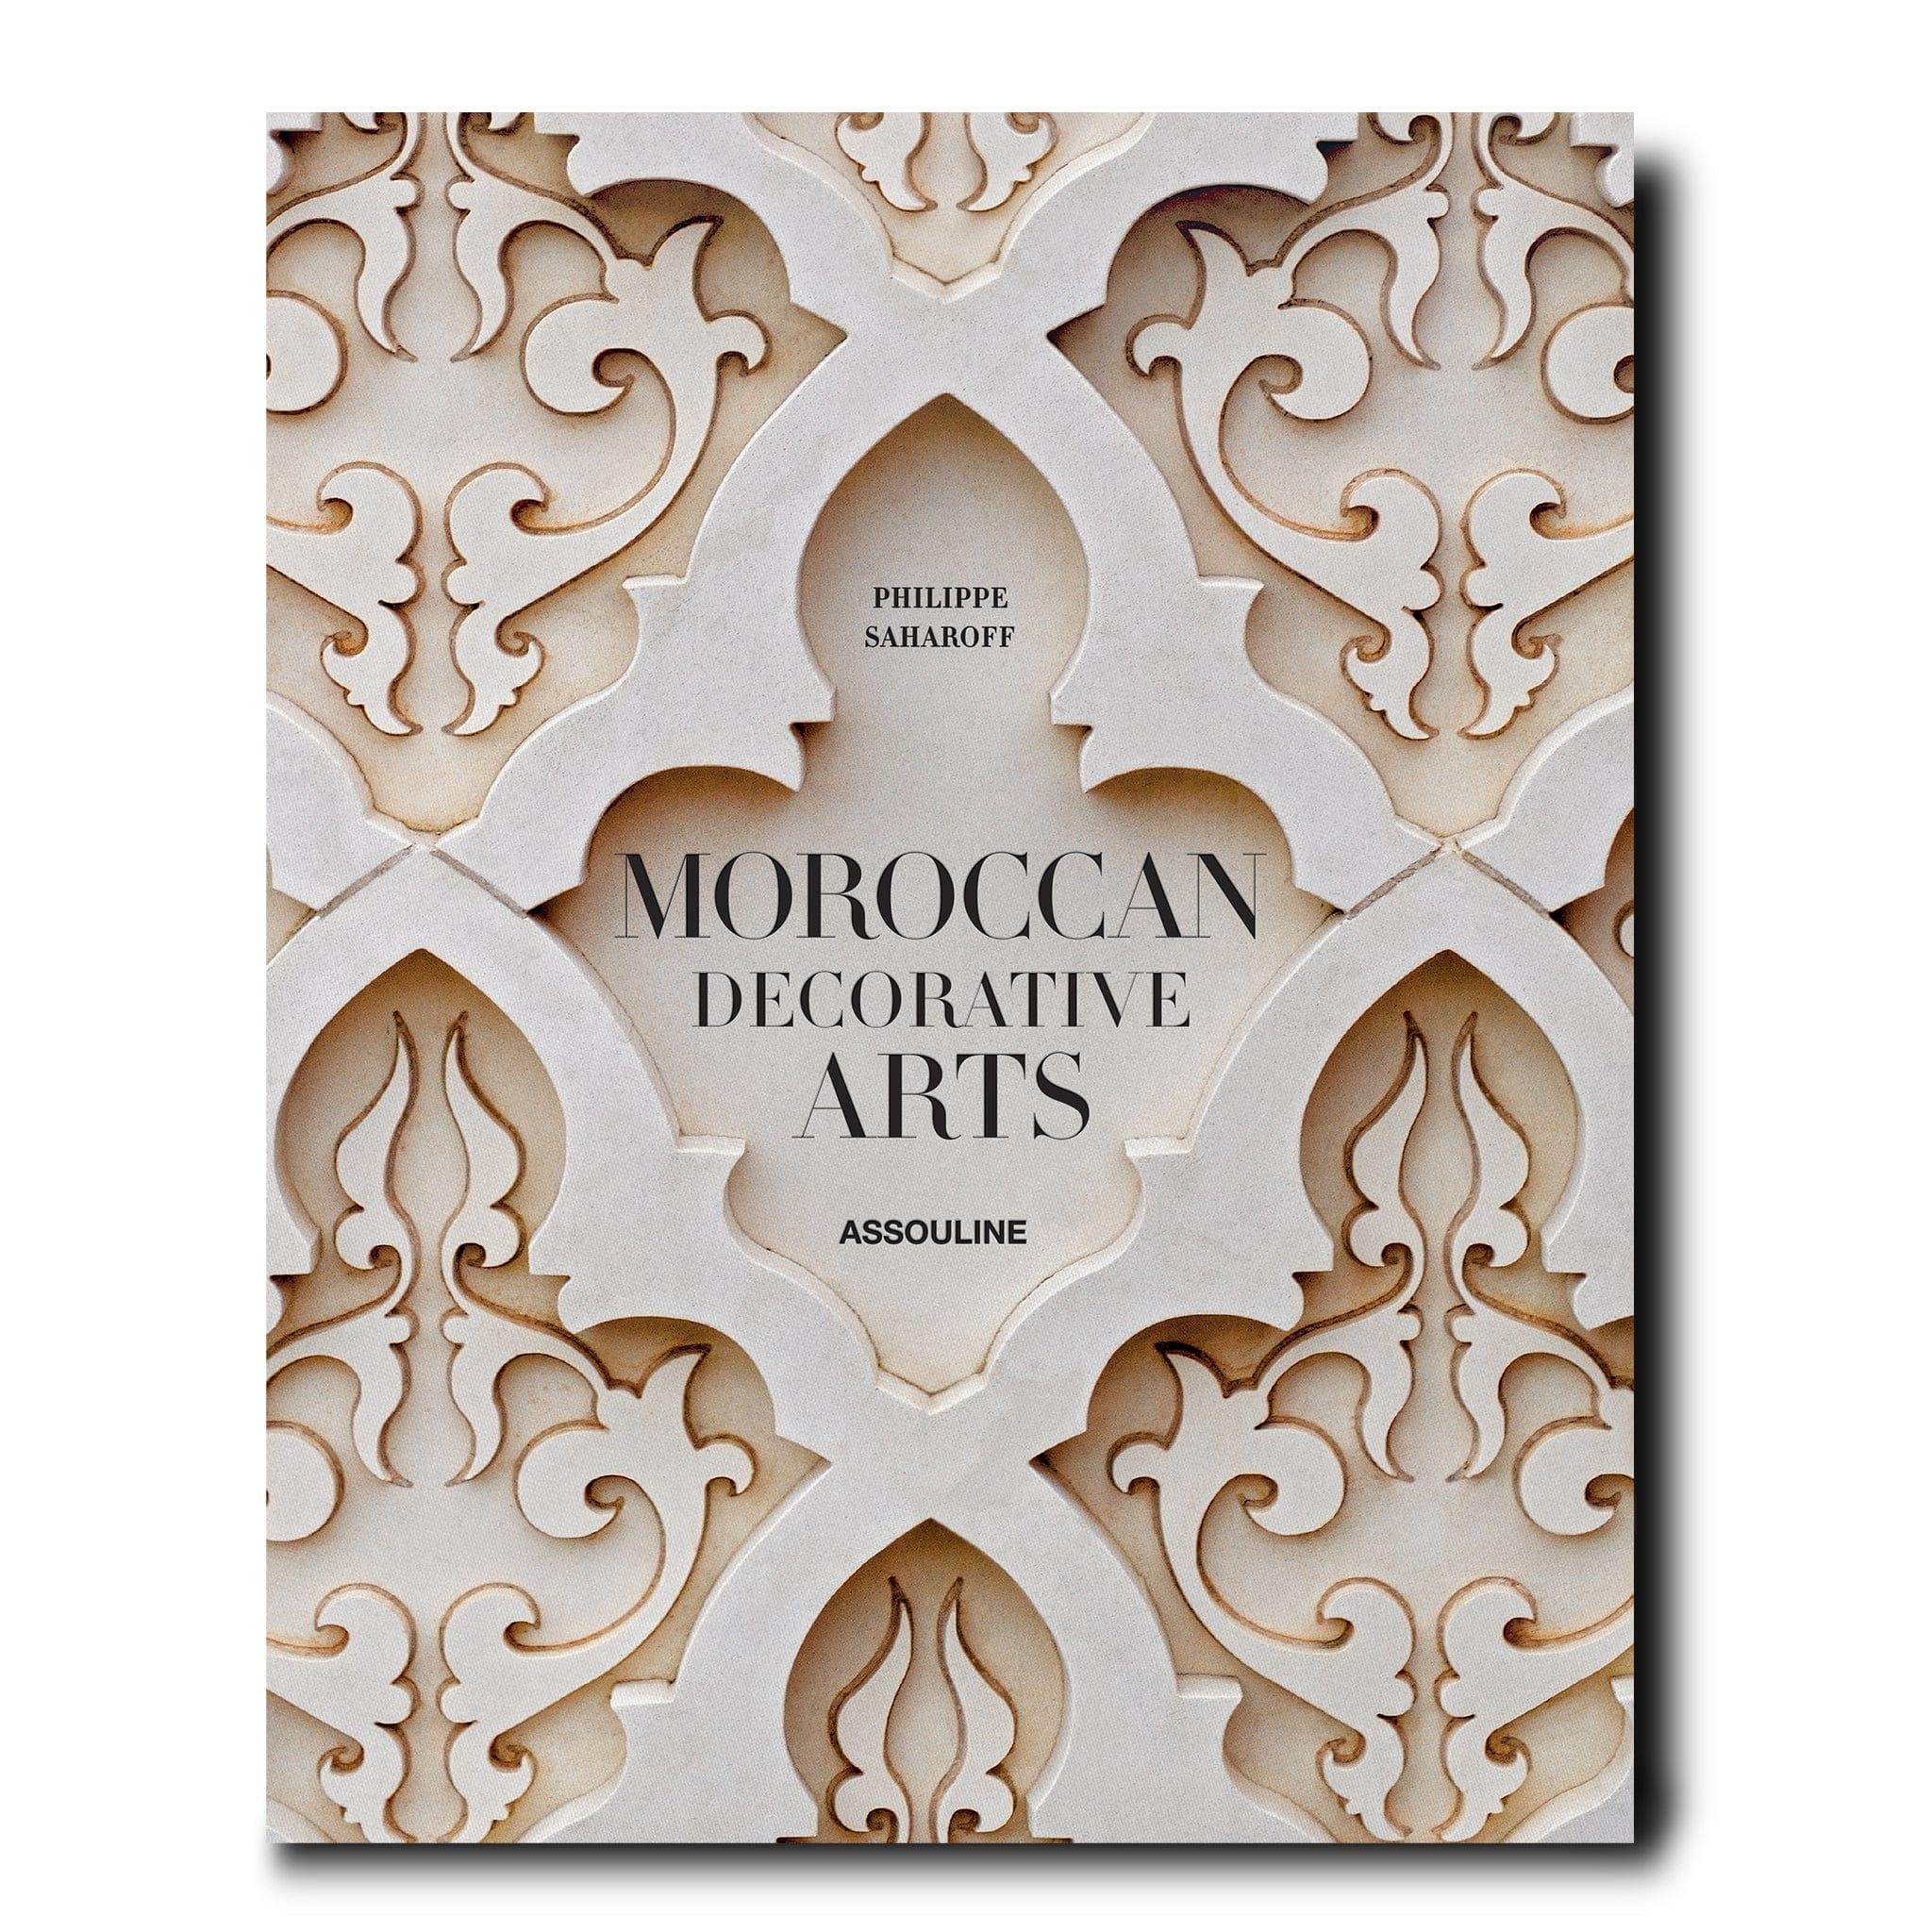 Morocco's enduring artistic heritage and craftsmanship are celebrated worldwide. Photographer Philippe Saharoff's three-year exploration captures the nation's vibrant artistry, from Marrakech's leatherwork to Essaouira's woodcraft. This 300-page